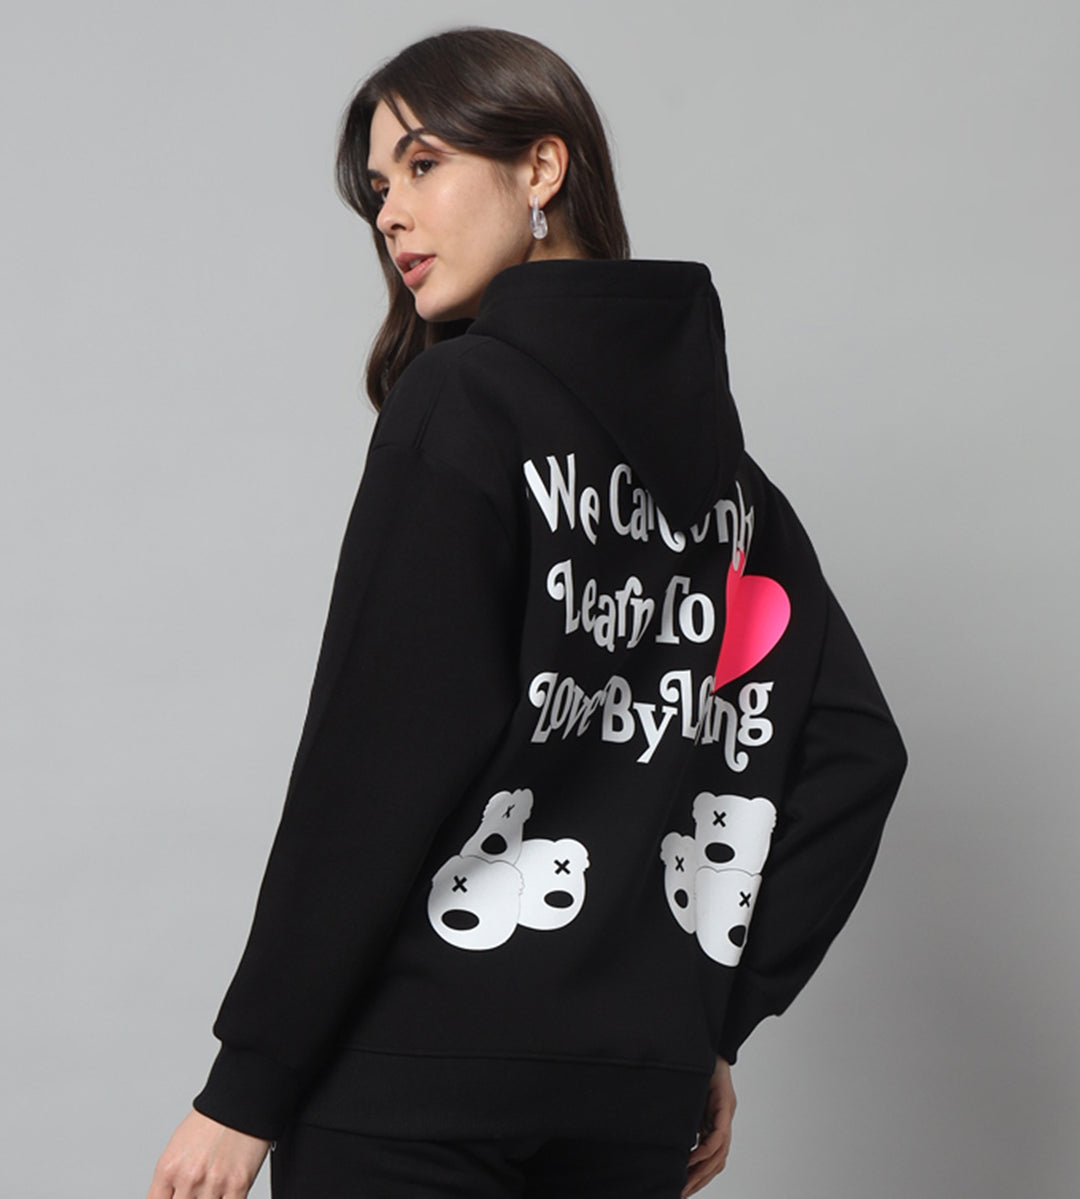 Griffel Women Oversized Fit Black WE CAN ONLY LEARN TO LOVE BY LOVING Print Cotton Fleece Front Logo Fleece Hoodie Sweatshirt with Full Sleeve - griffel